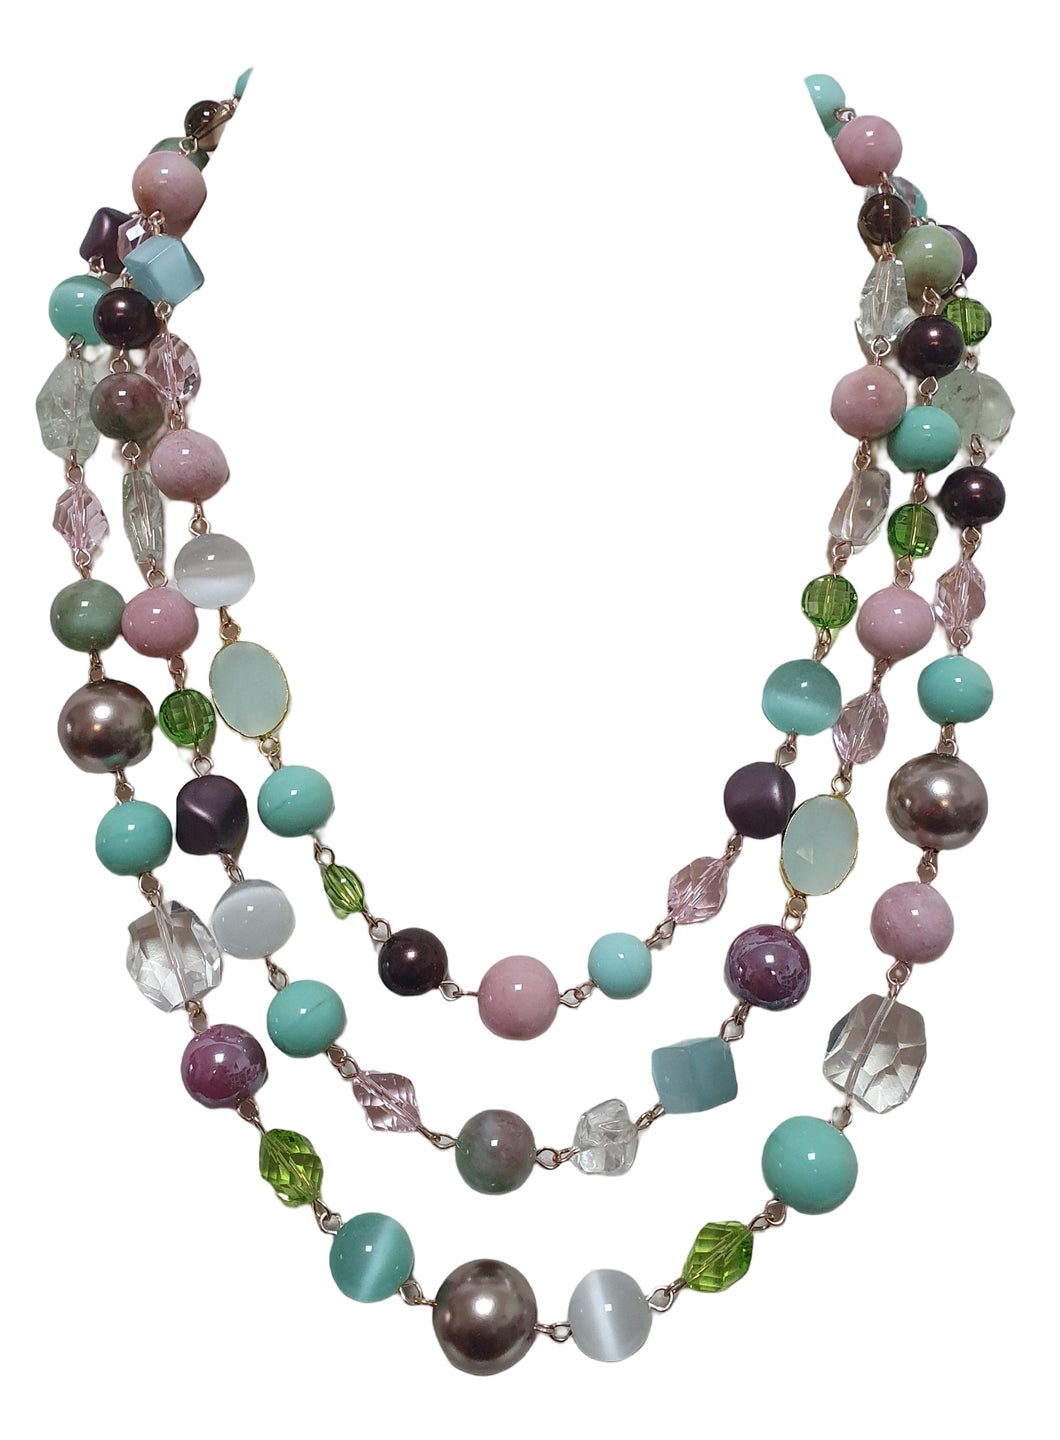 Gold necklace with pink and green elements